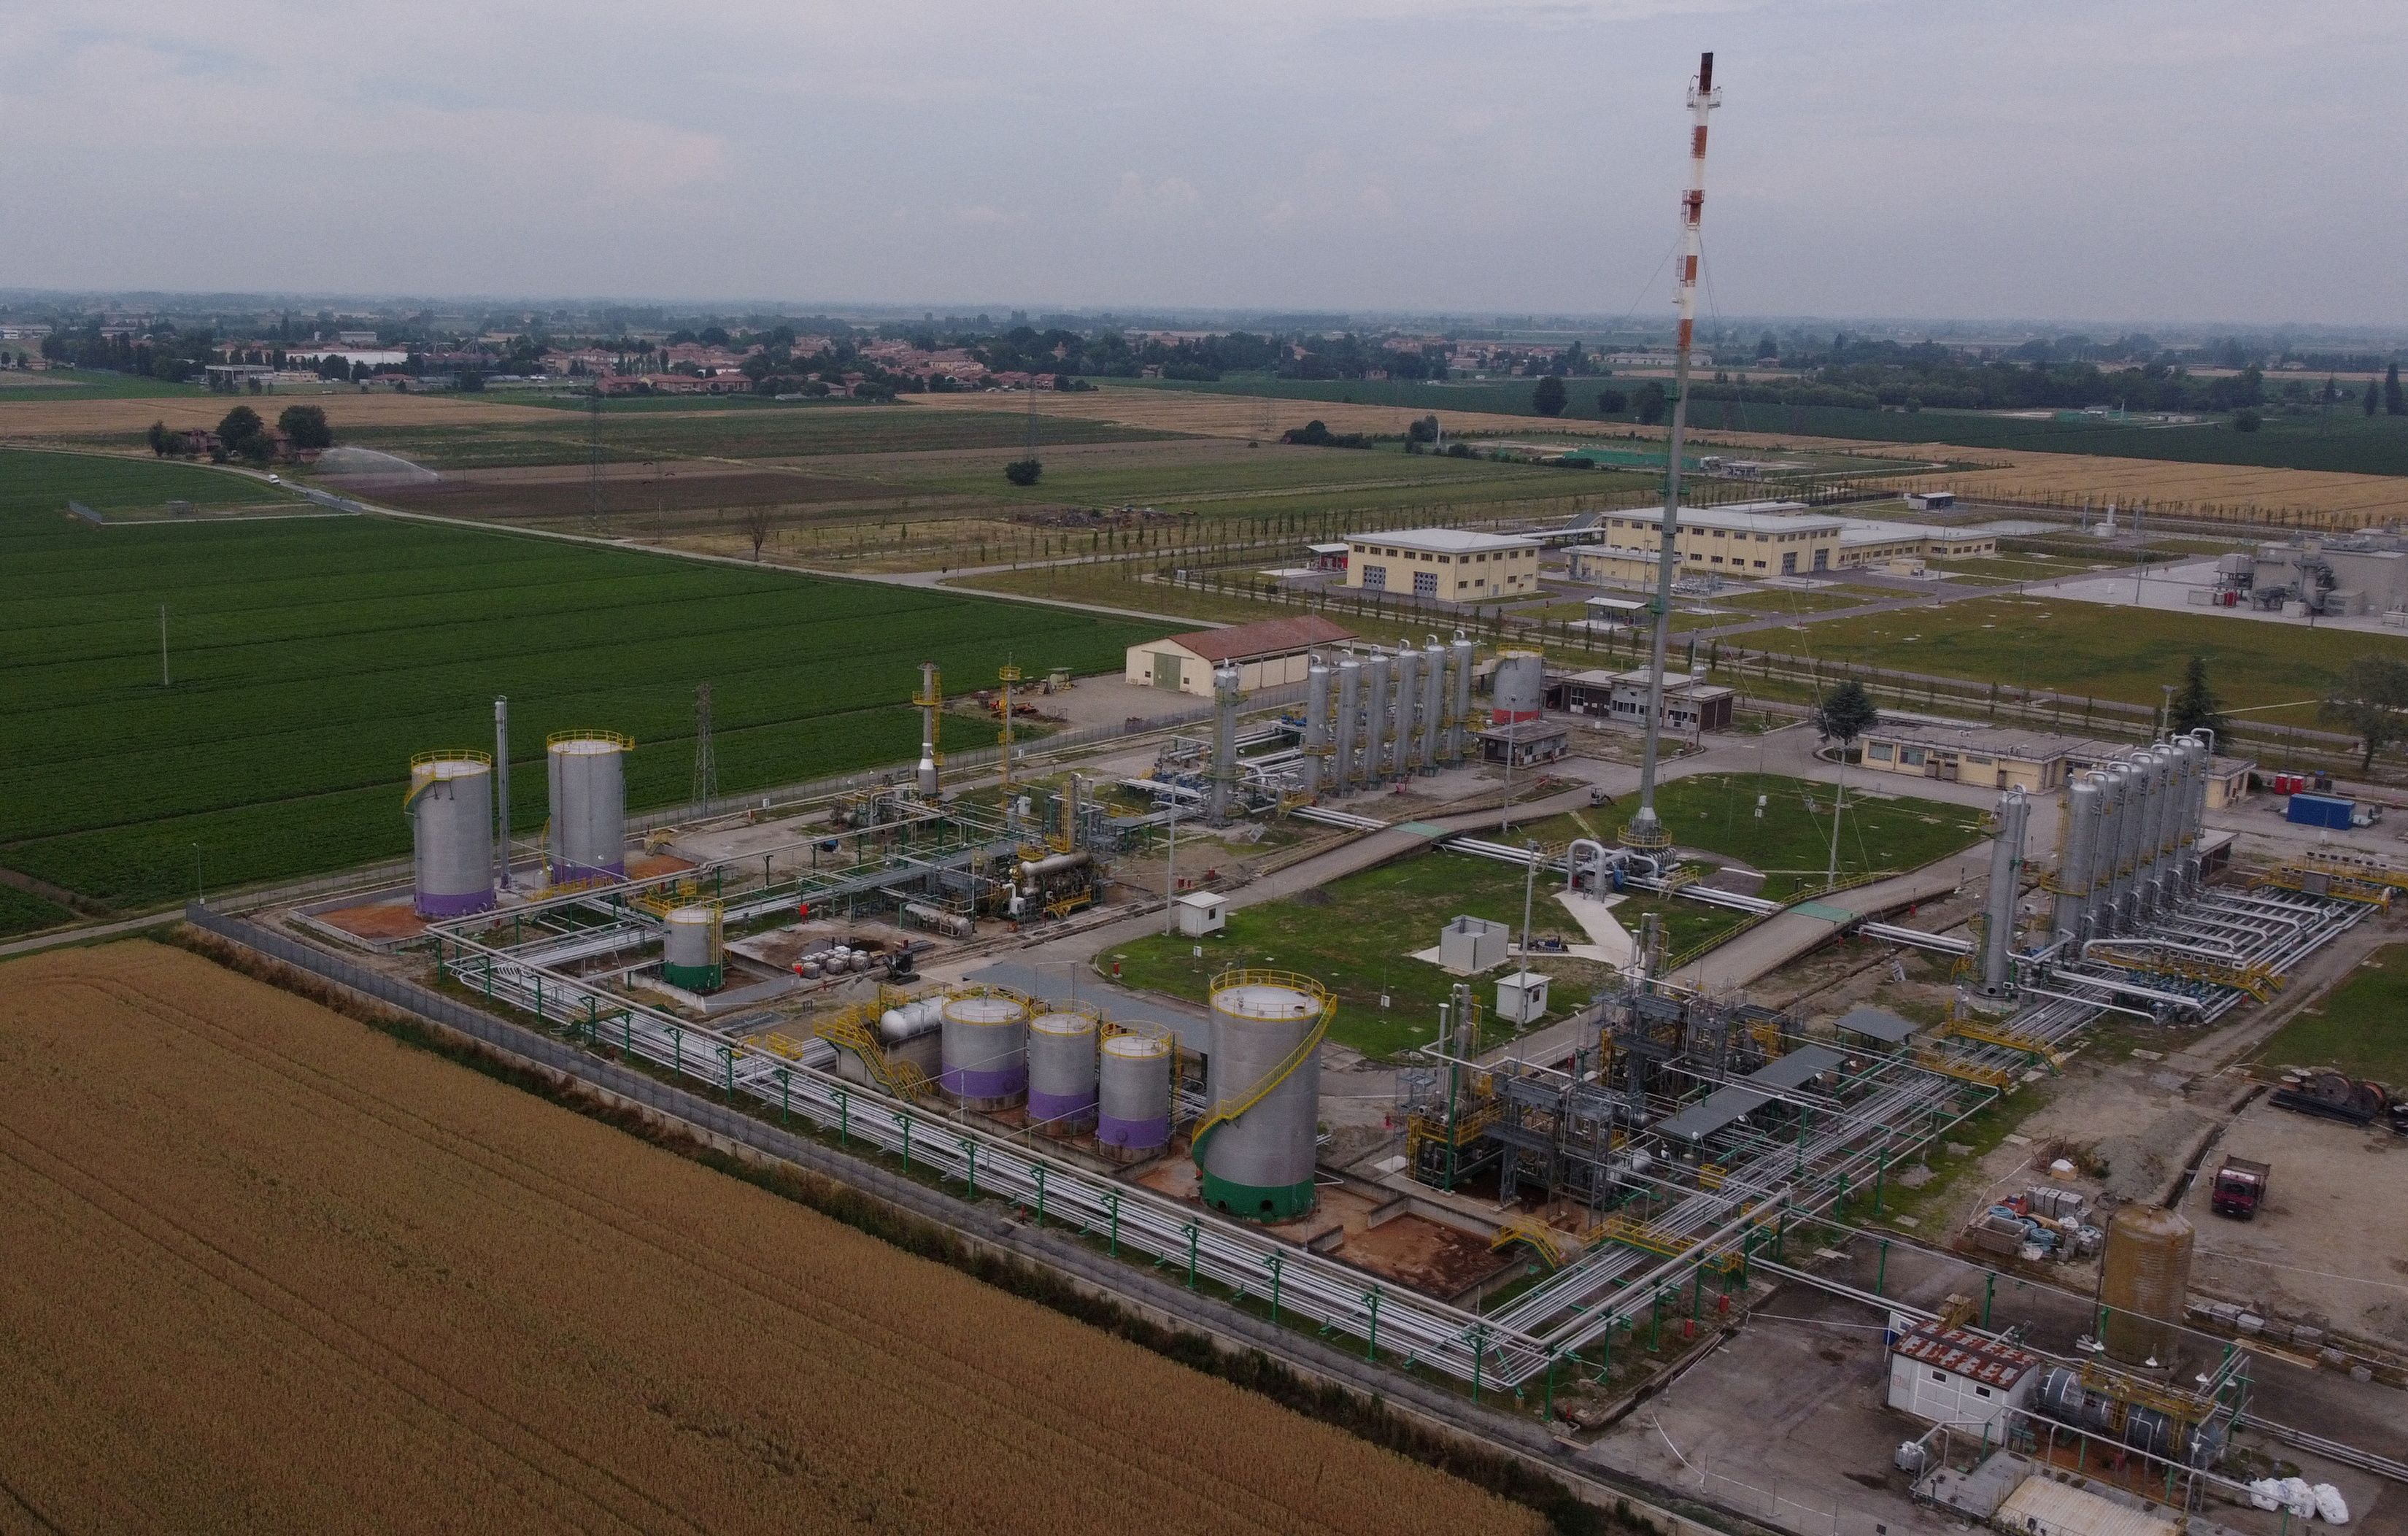 An aerial view of the SNAM underground gas storage facility in Minerbio